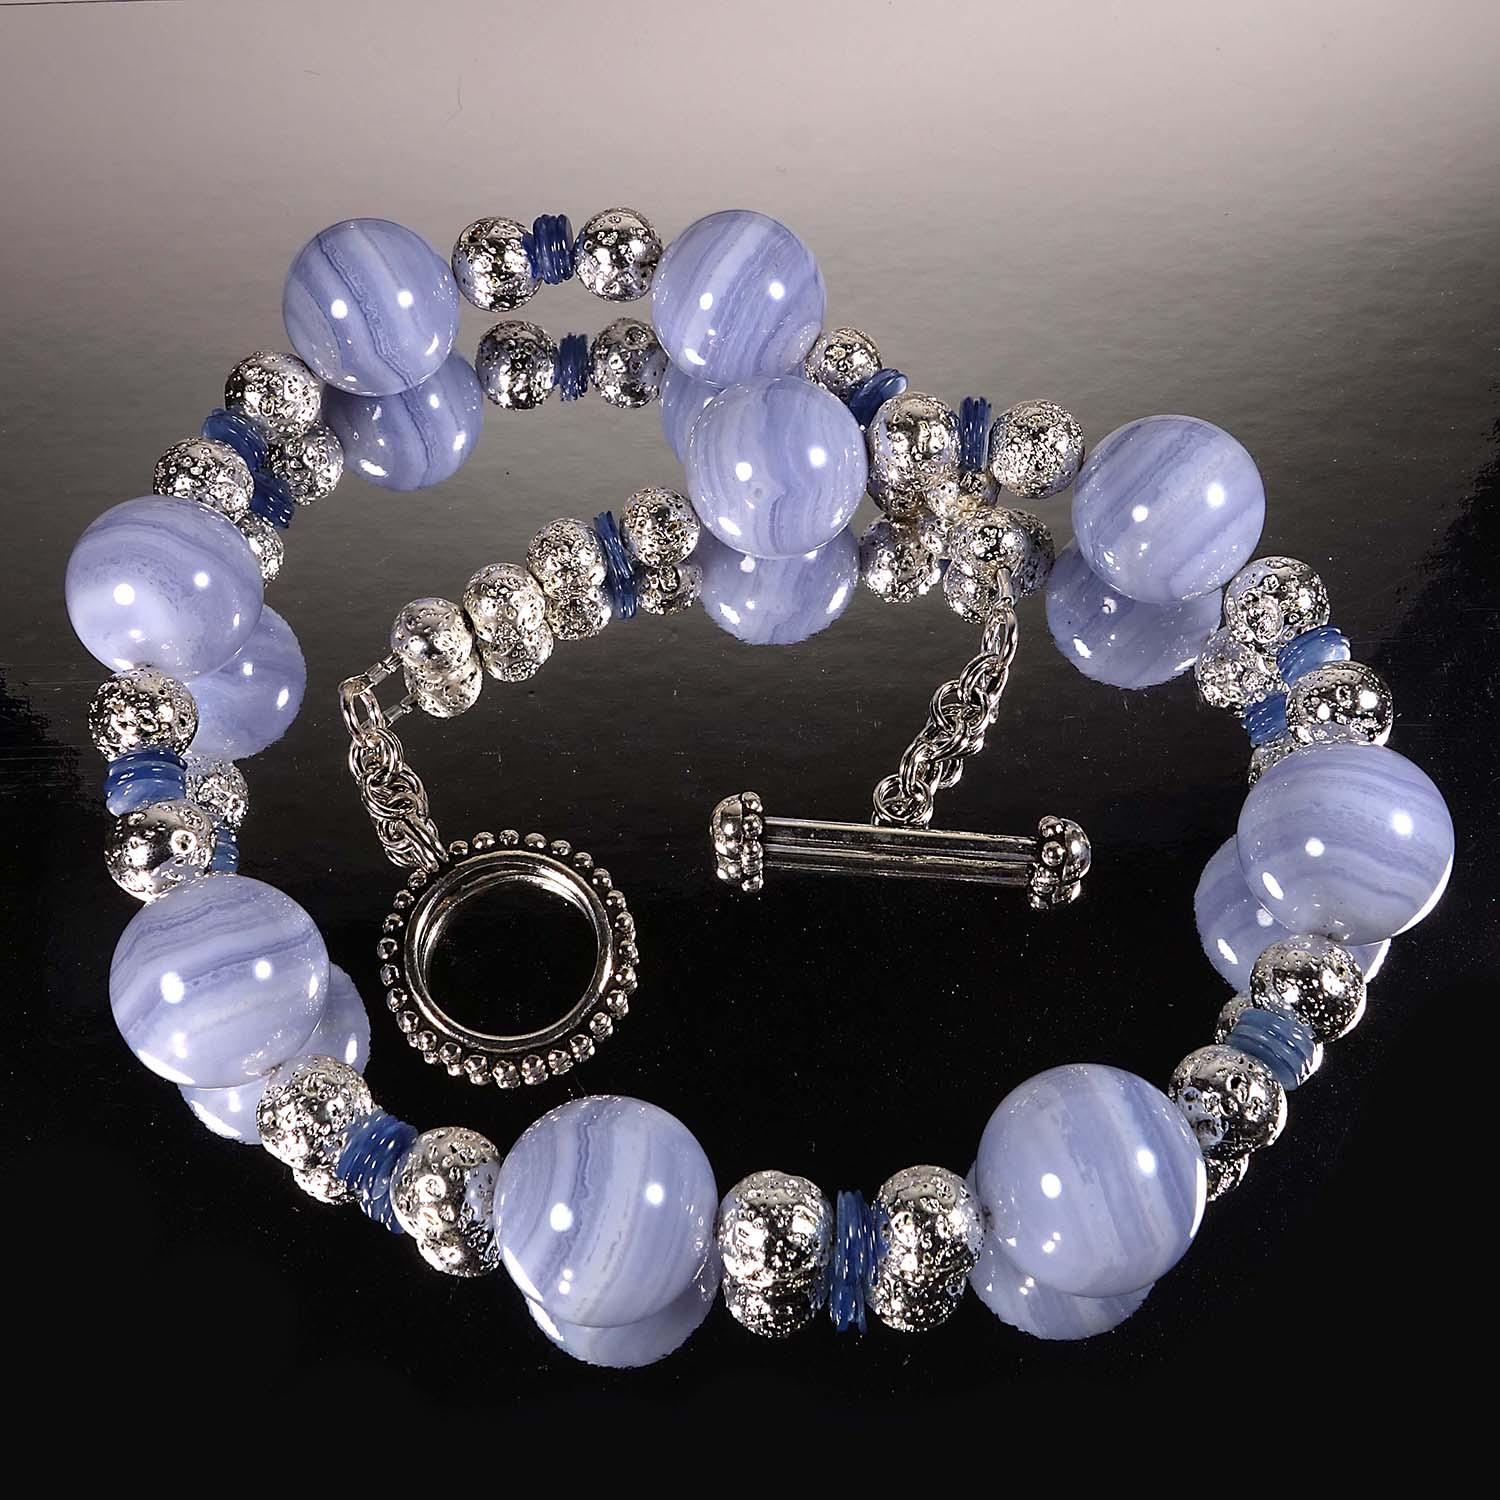 Stunning Blue Lace Agate Necklace 4